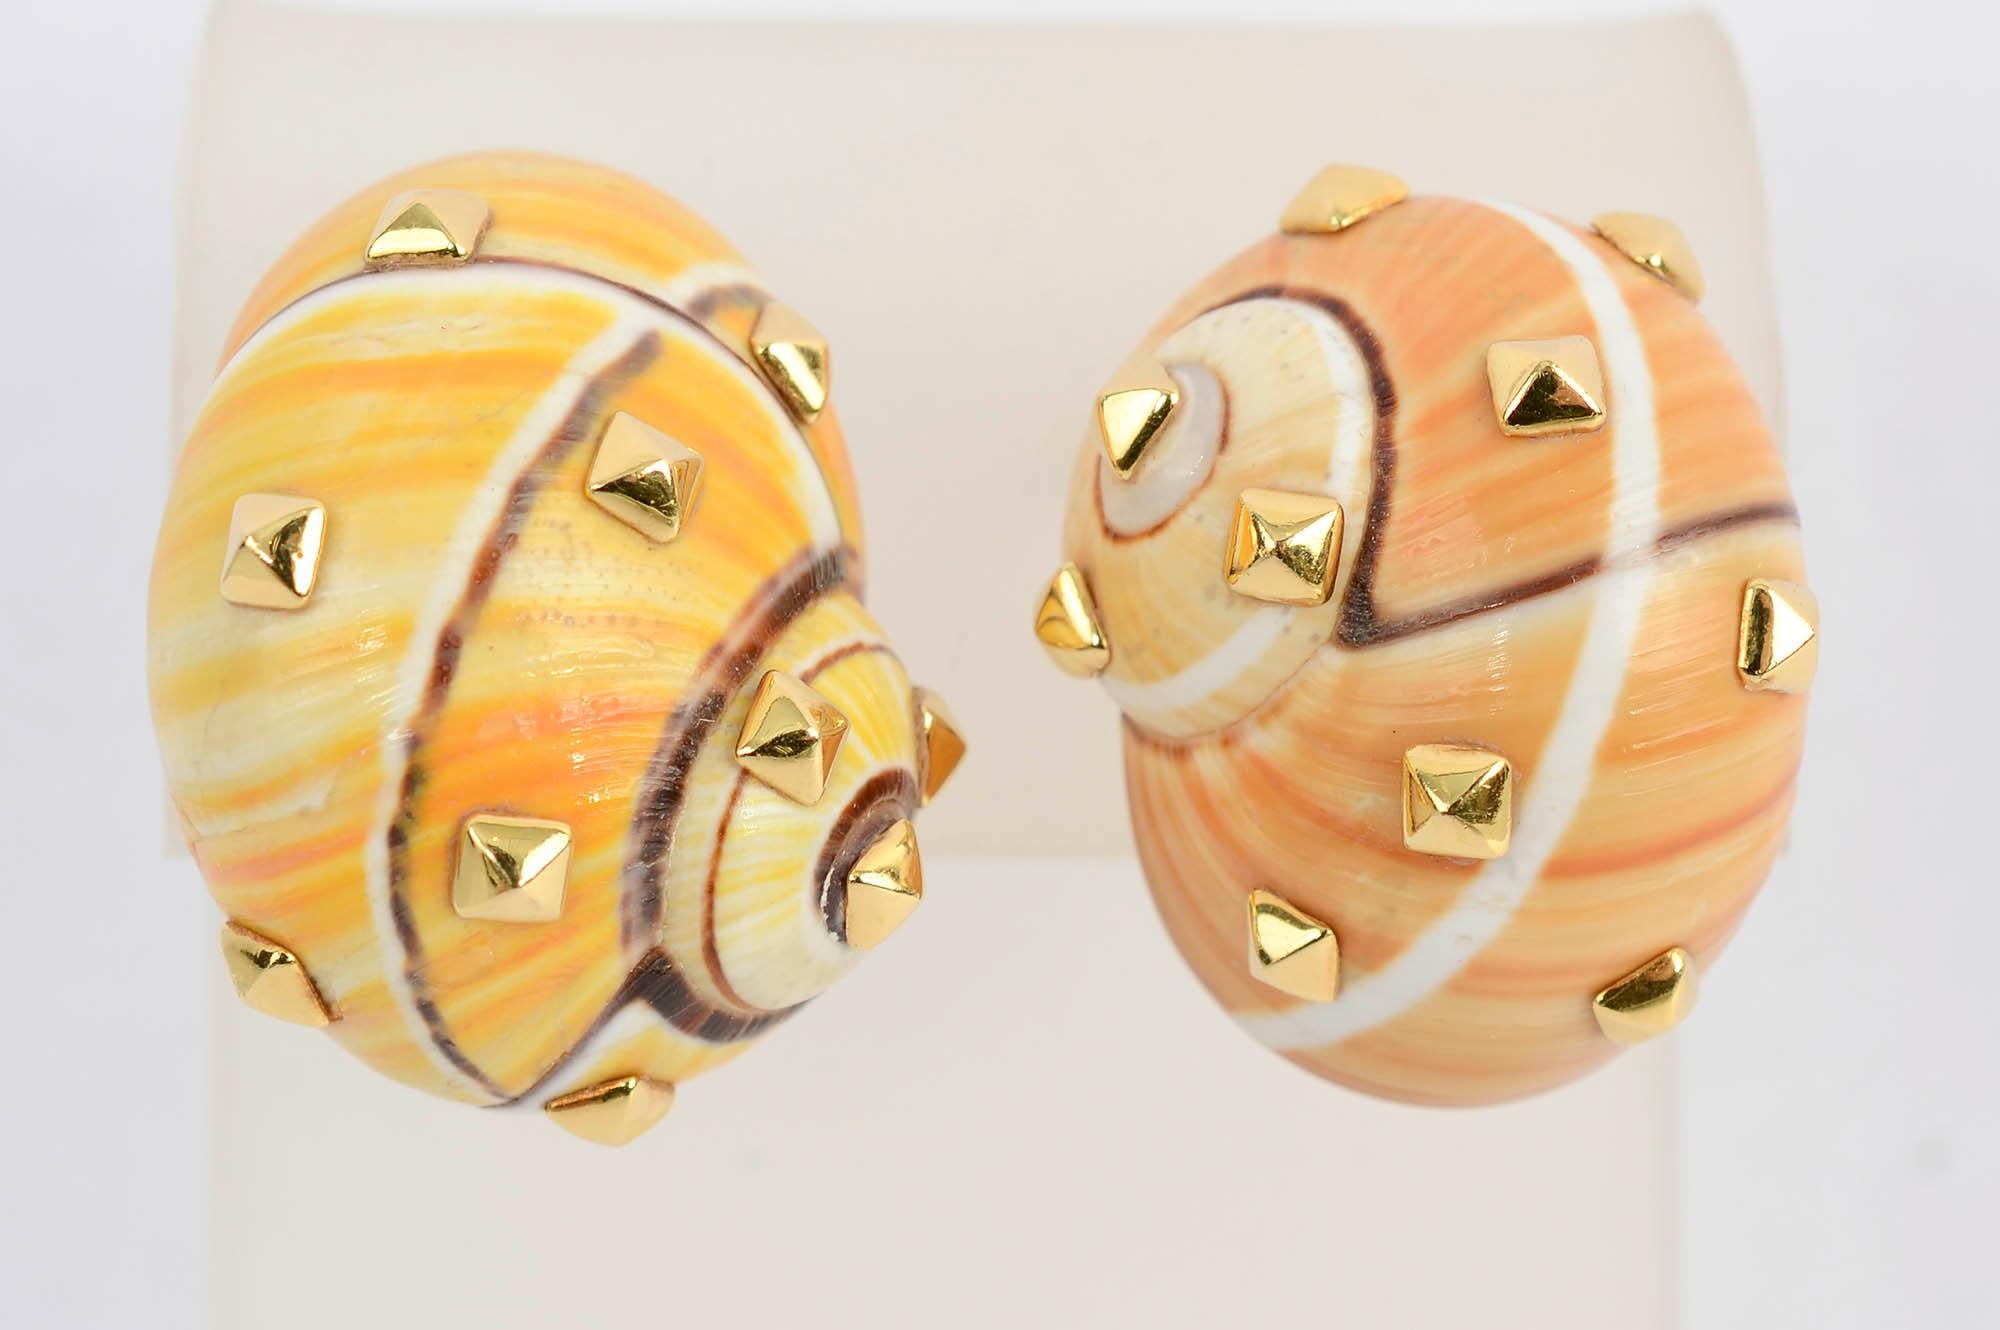 Very chic shell earrings with pyramidal gold medallions by Fred Leighton. The  shells are natural so they are not the exact same color. Backs are clips that can be converted to posts.
The earrings measure 3/4